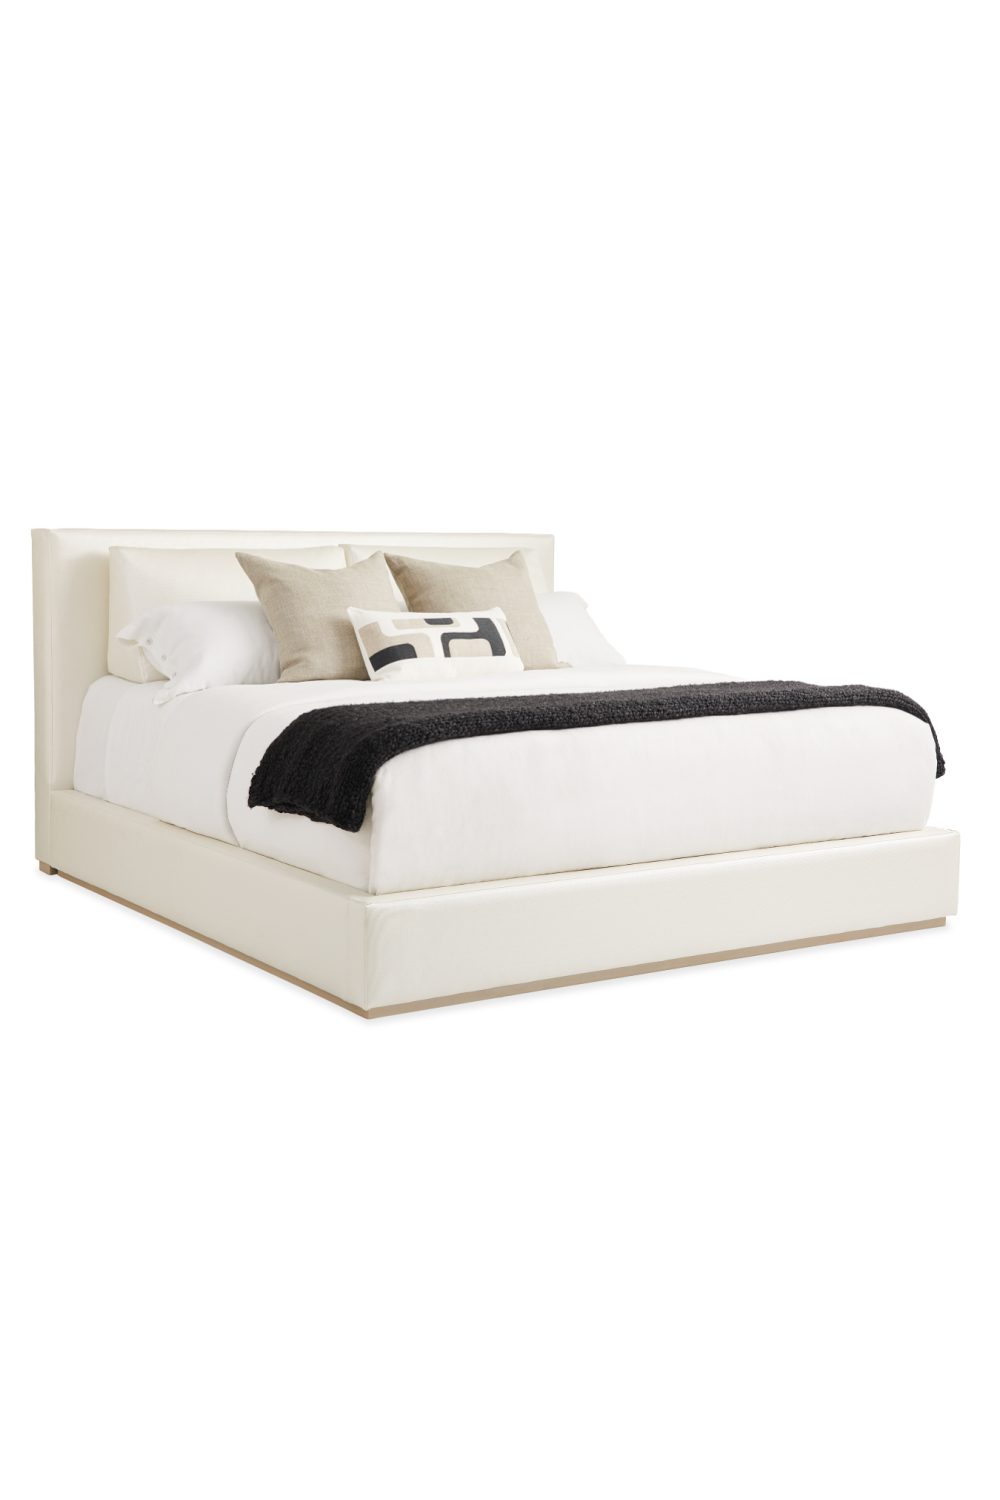 White Modern King Bed | Caracole The Boutique | Oroa.com